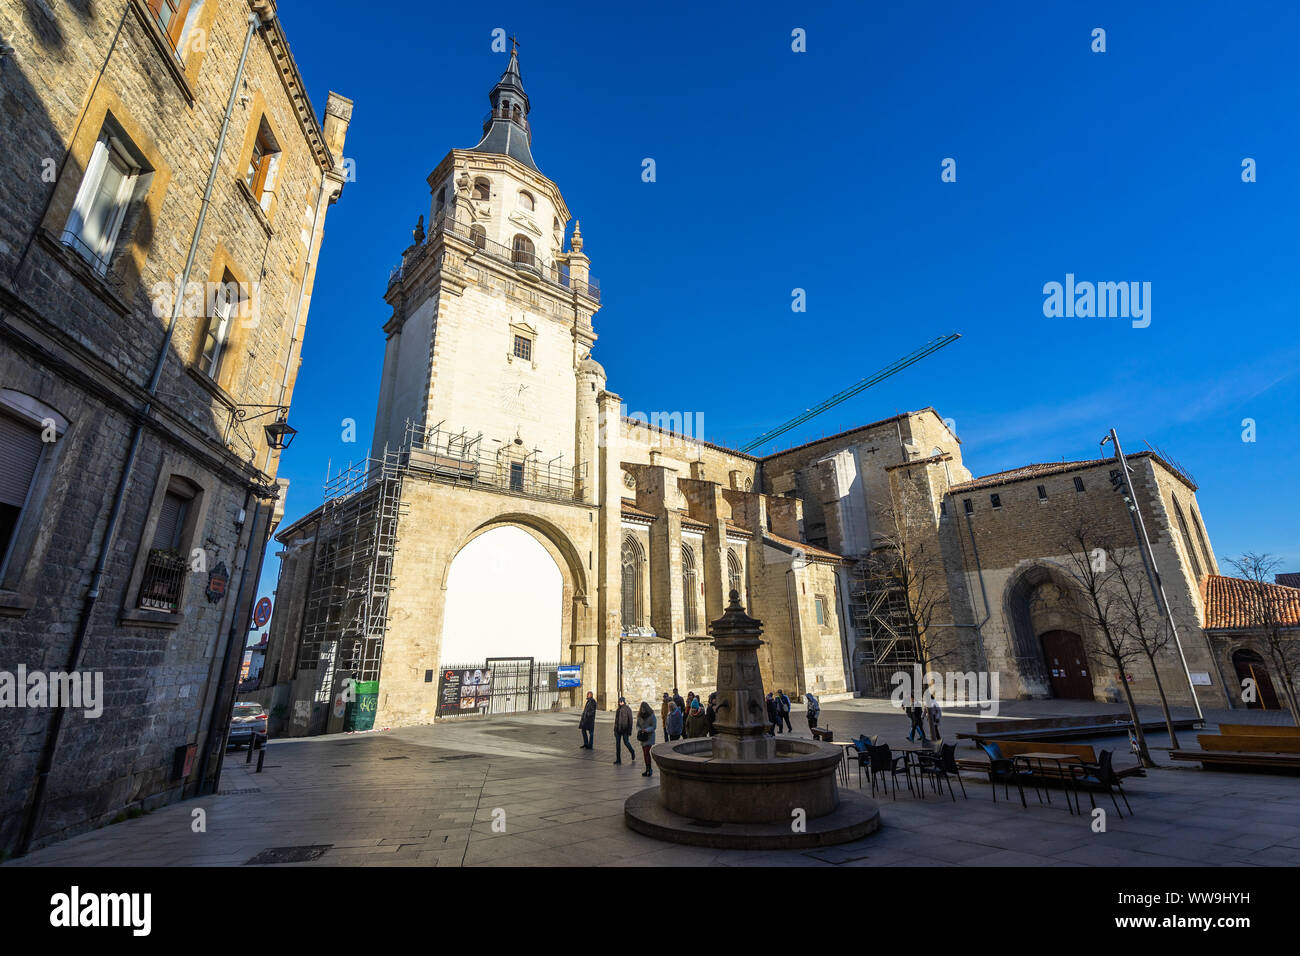 Wide angle view of Cathedral of Santa Maria de Vitoria, a fine example of Gothic style architecture, built in 13th and 14th century, Vitoria-Gasteiz Stock Photo